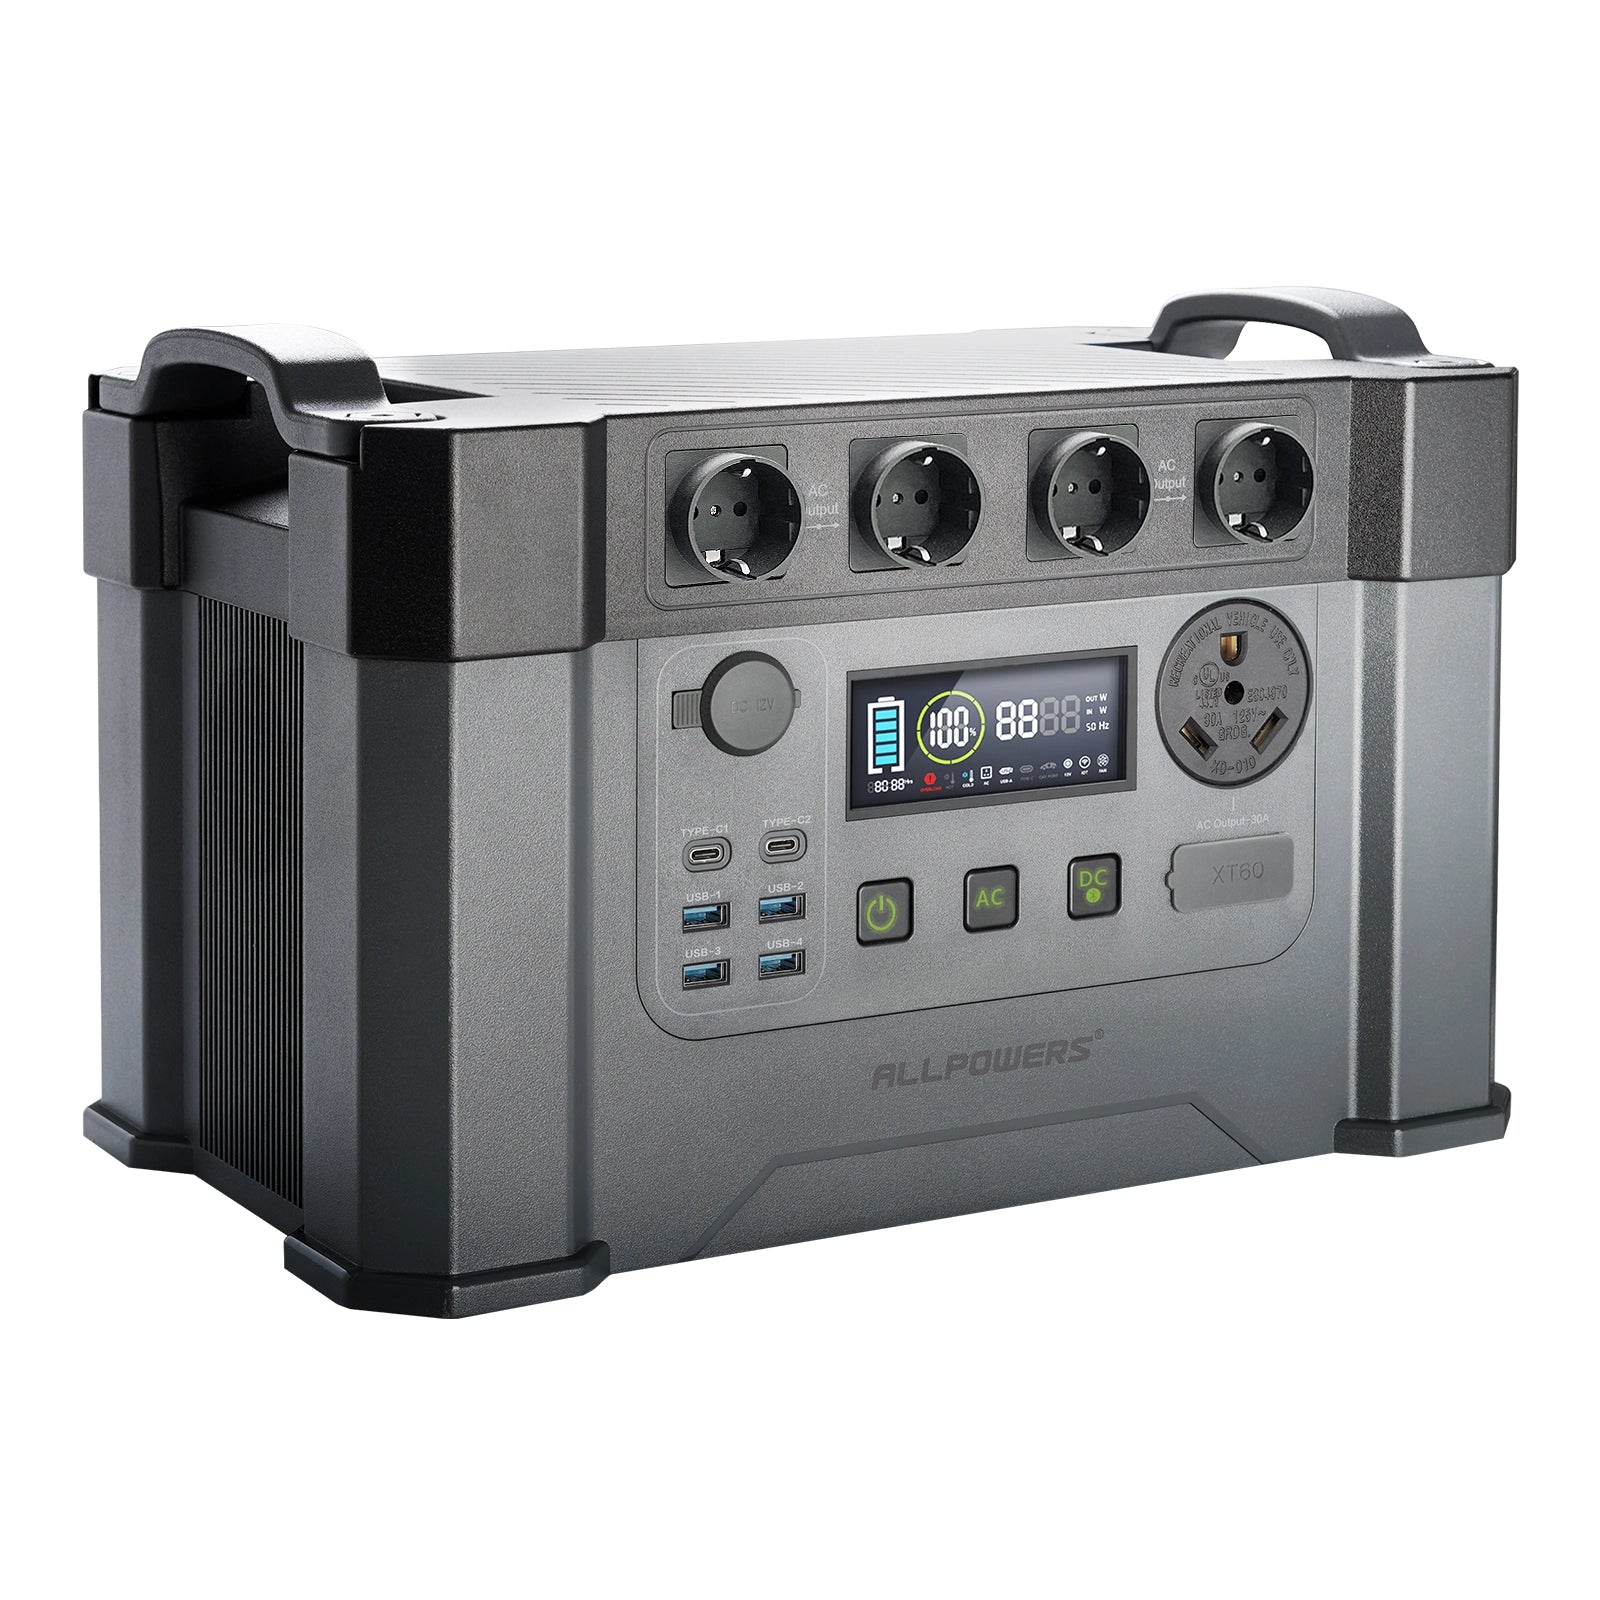 ALLPOWERS S2000 Pro Portable Power Station | 2400W 1500Wh